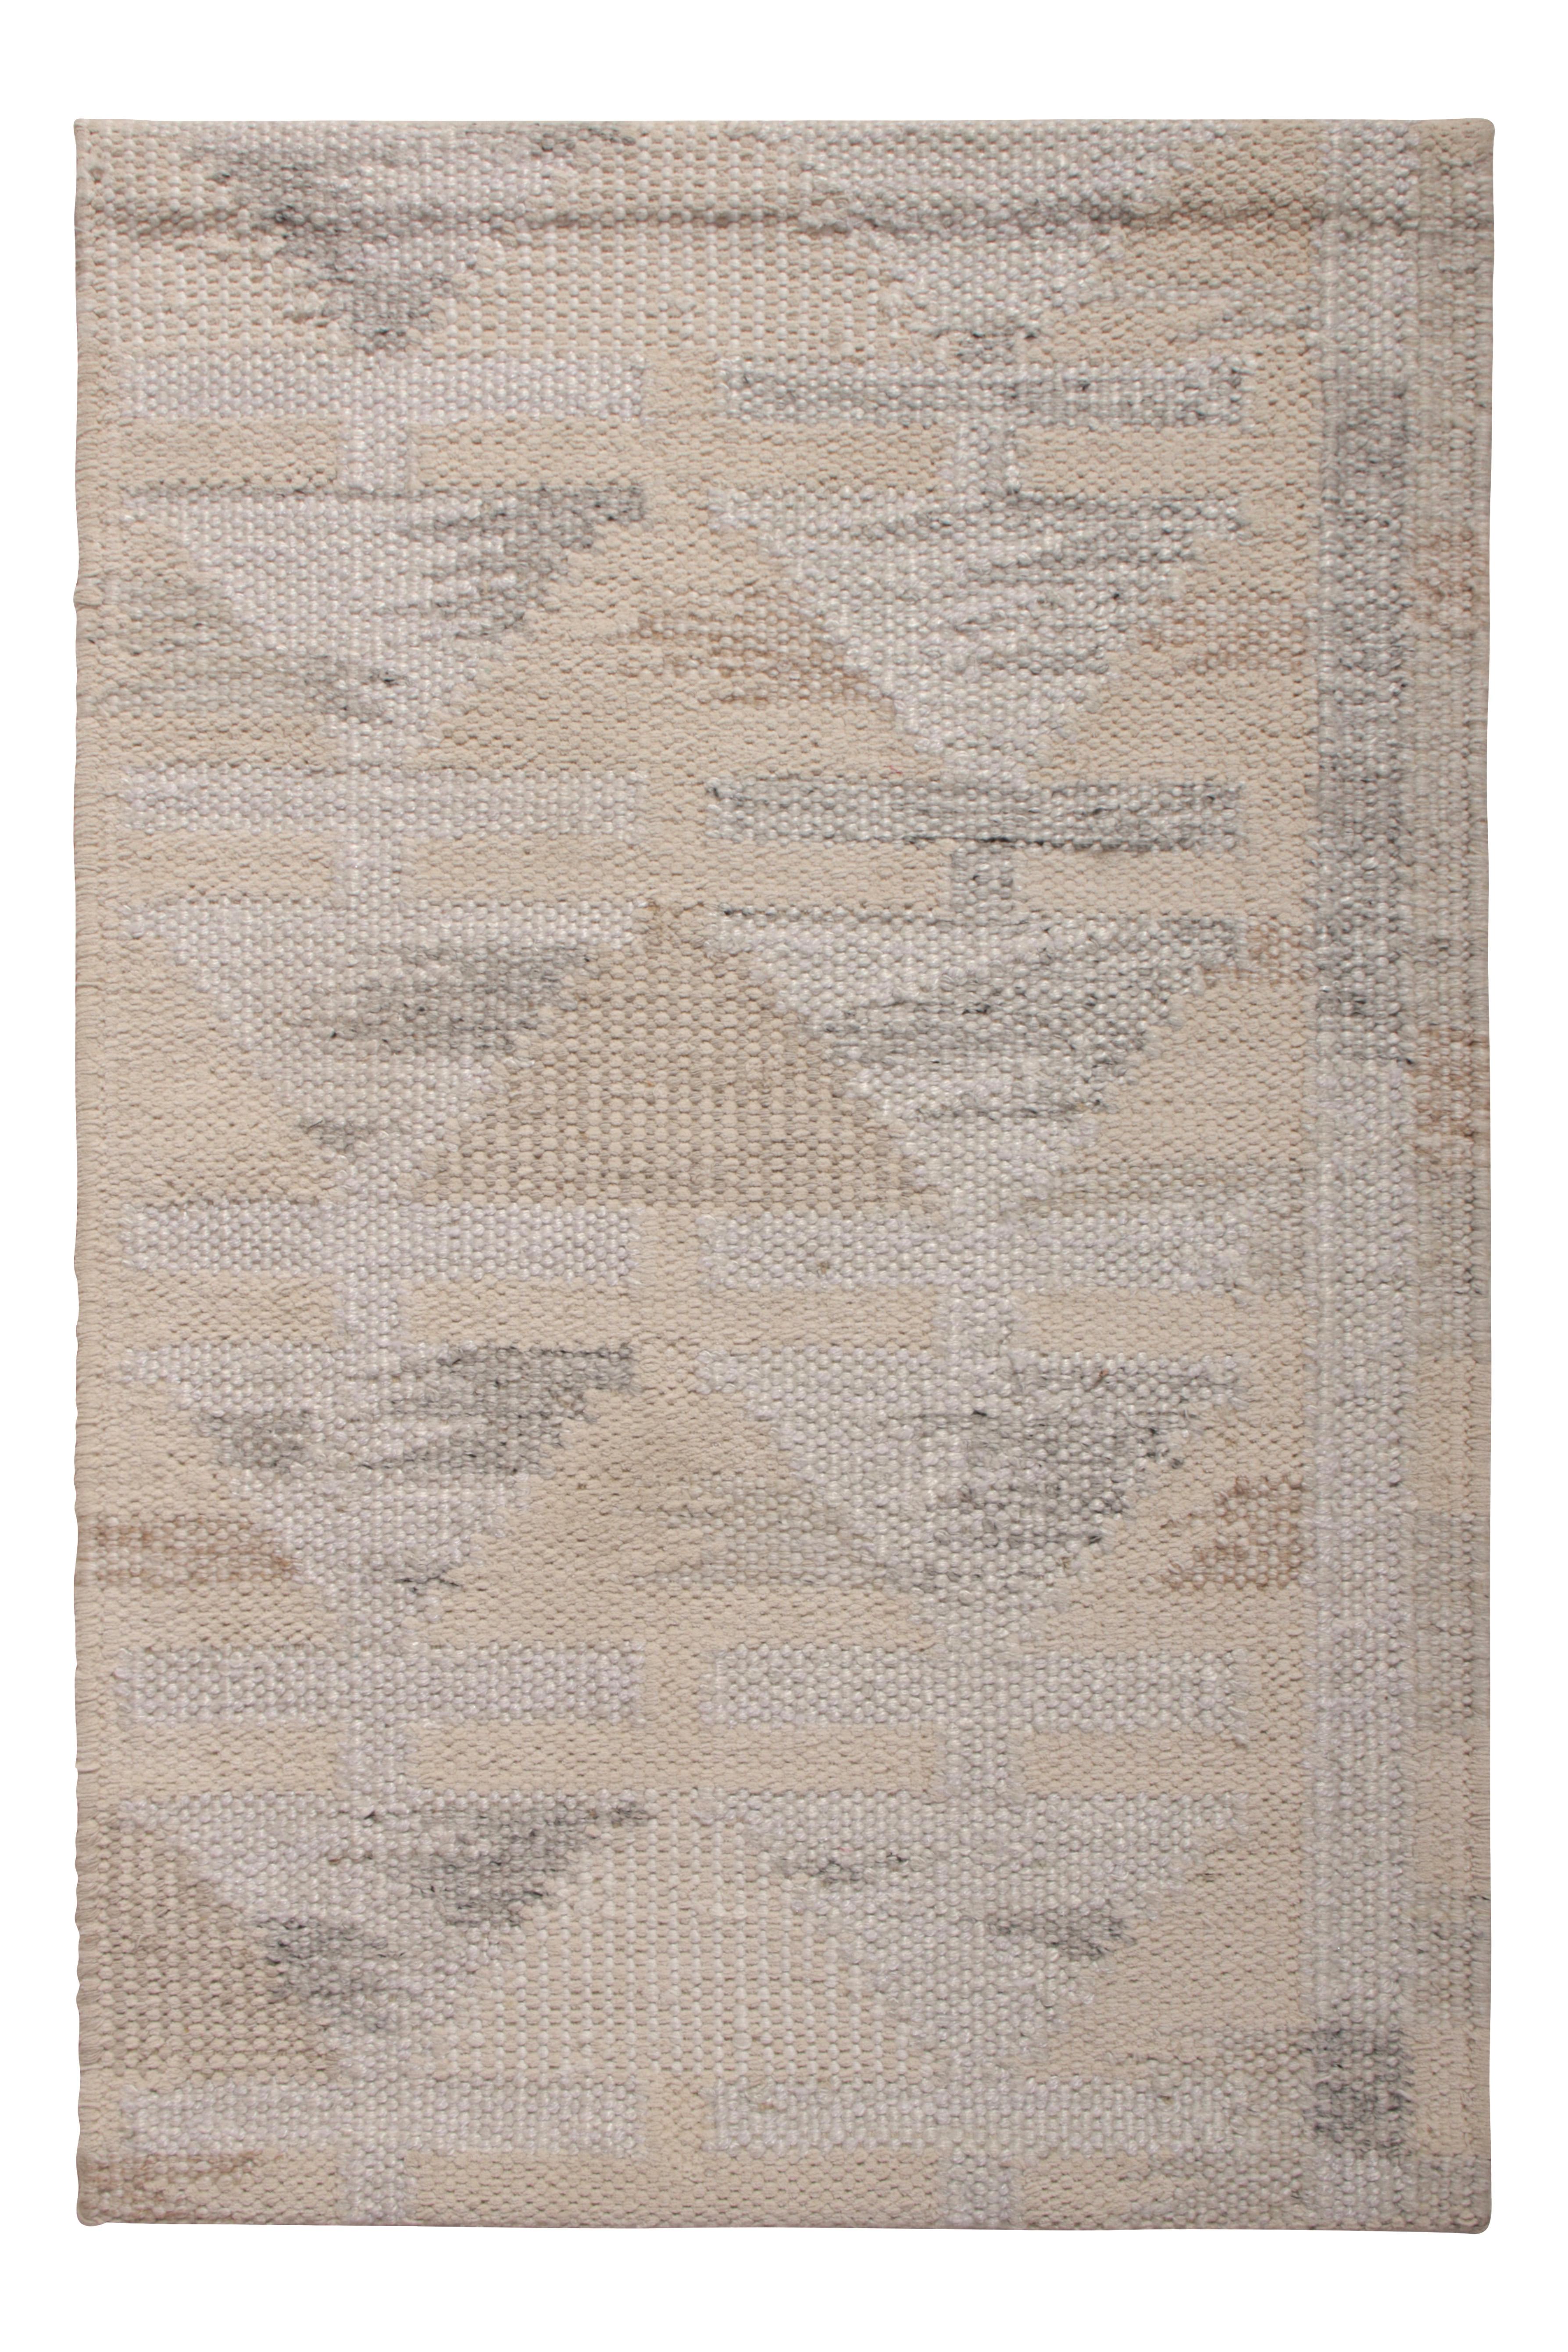 Hand-Knotted Rug & Kilim’s Scandinavian Style Gift-Size Kilim in Gray and Beige Patterns